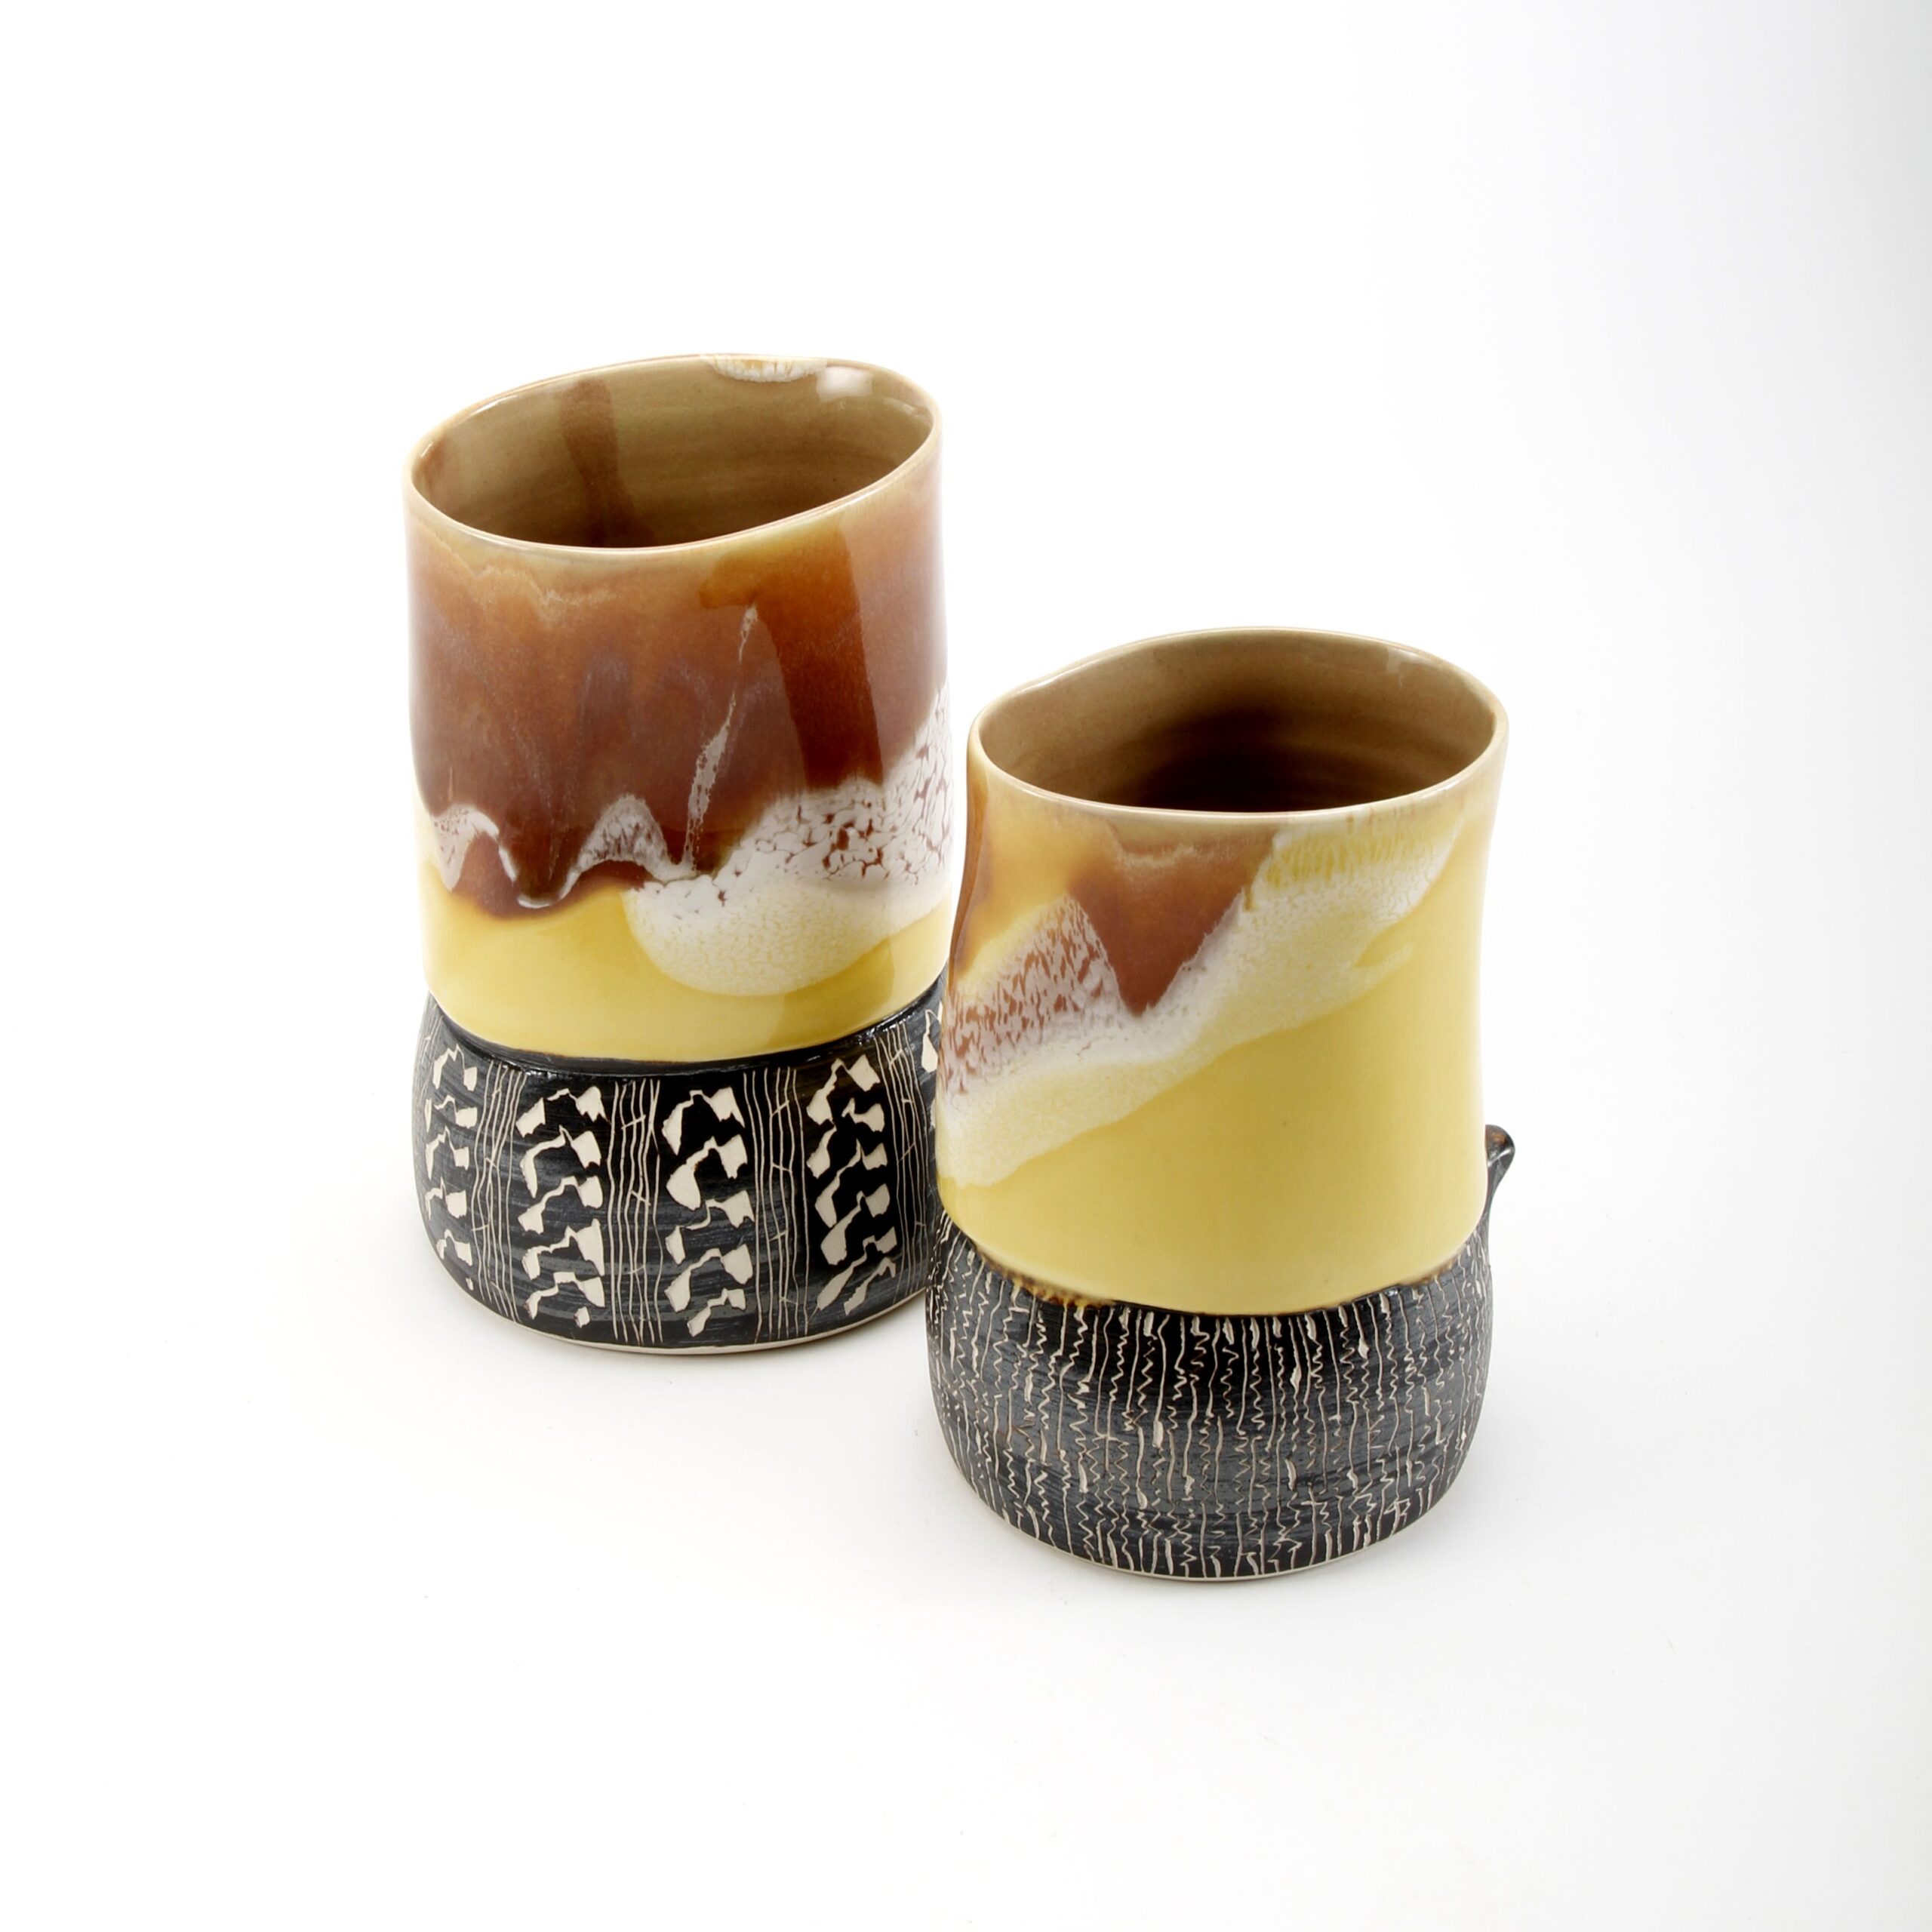 Jane Wilson: Assorted Vases- Black, White and Yellow Product Image 4 of 4